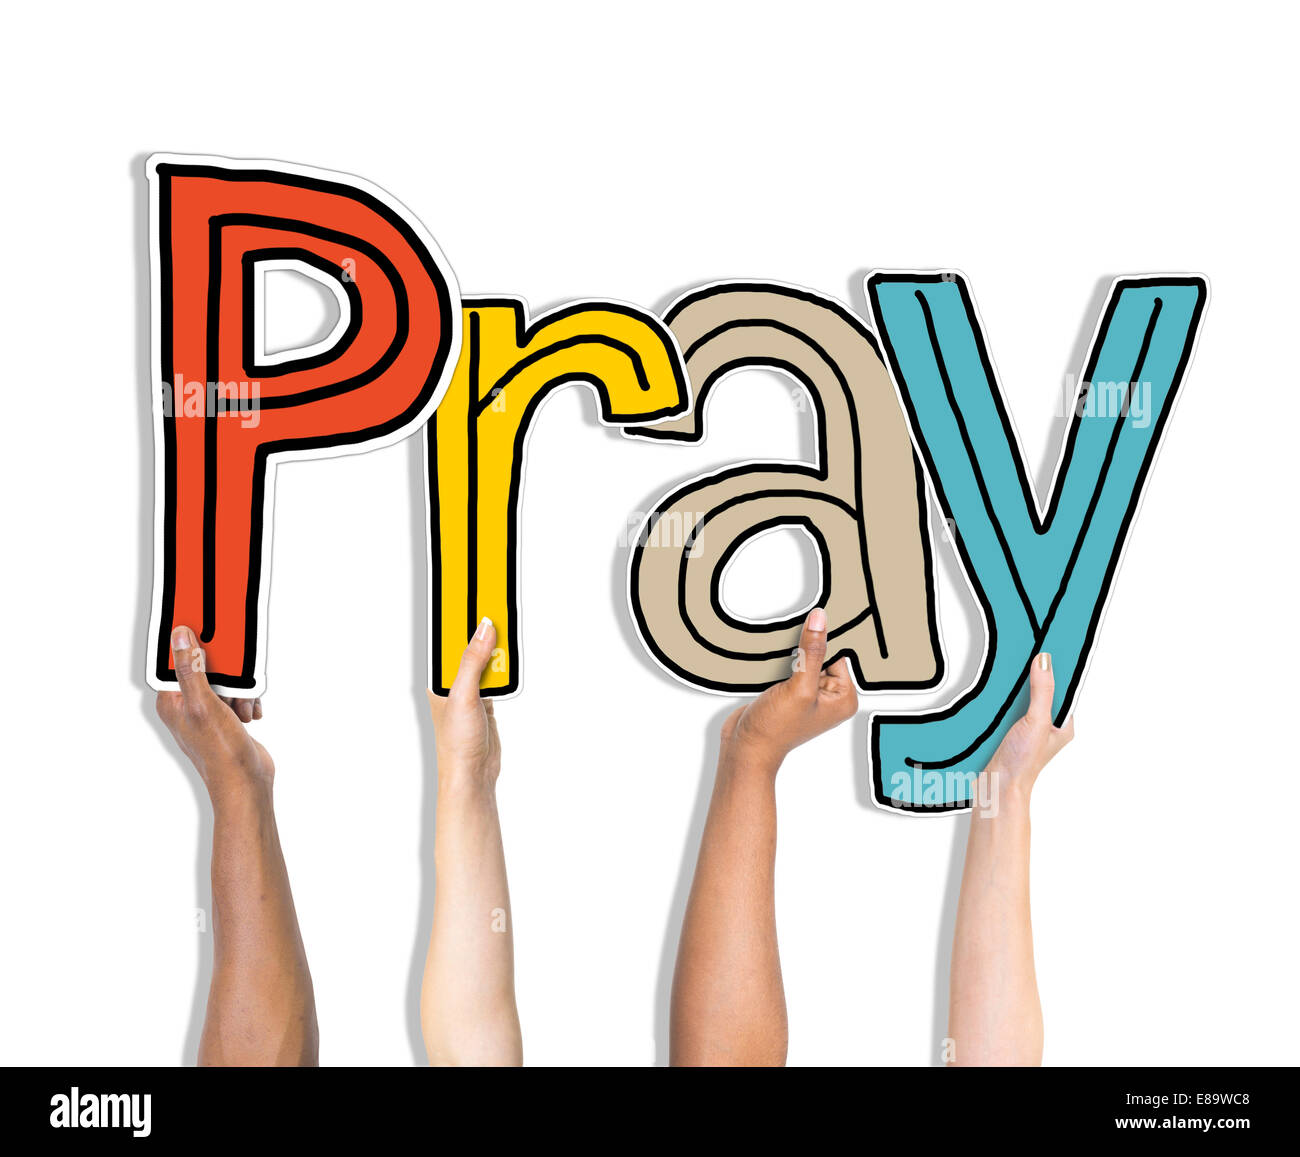 Pray Word Concepts Isolated on Background Stock Photo